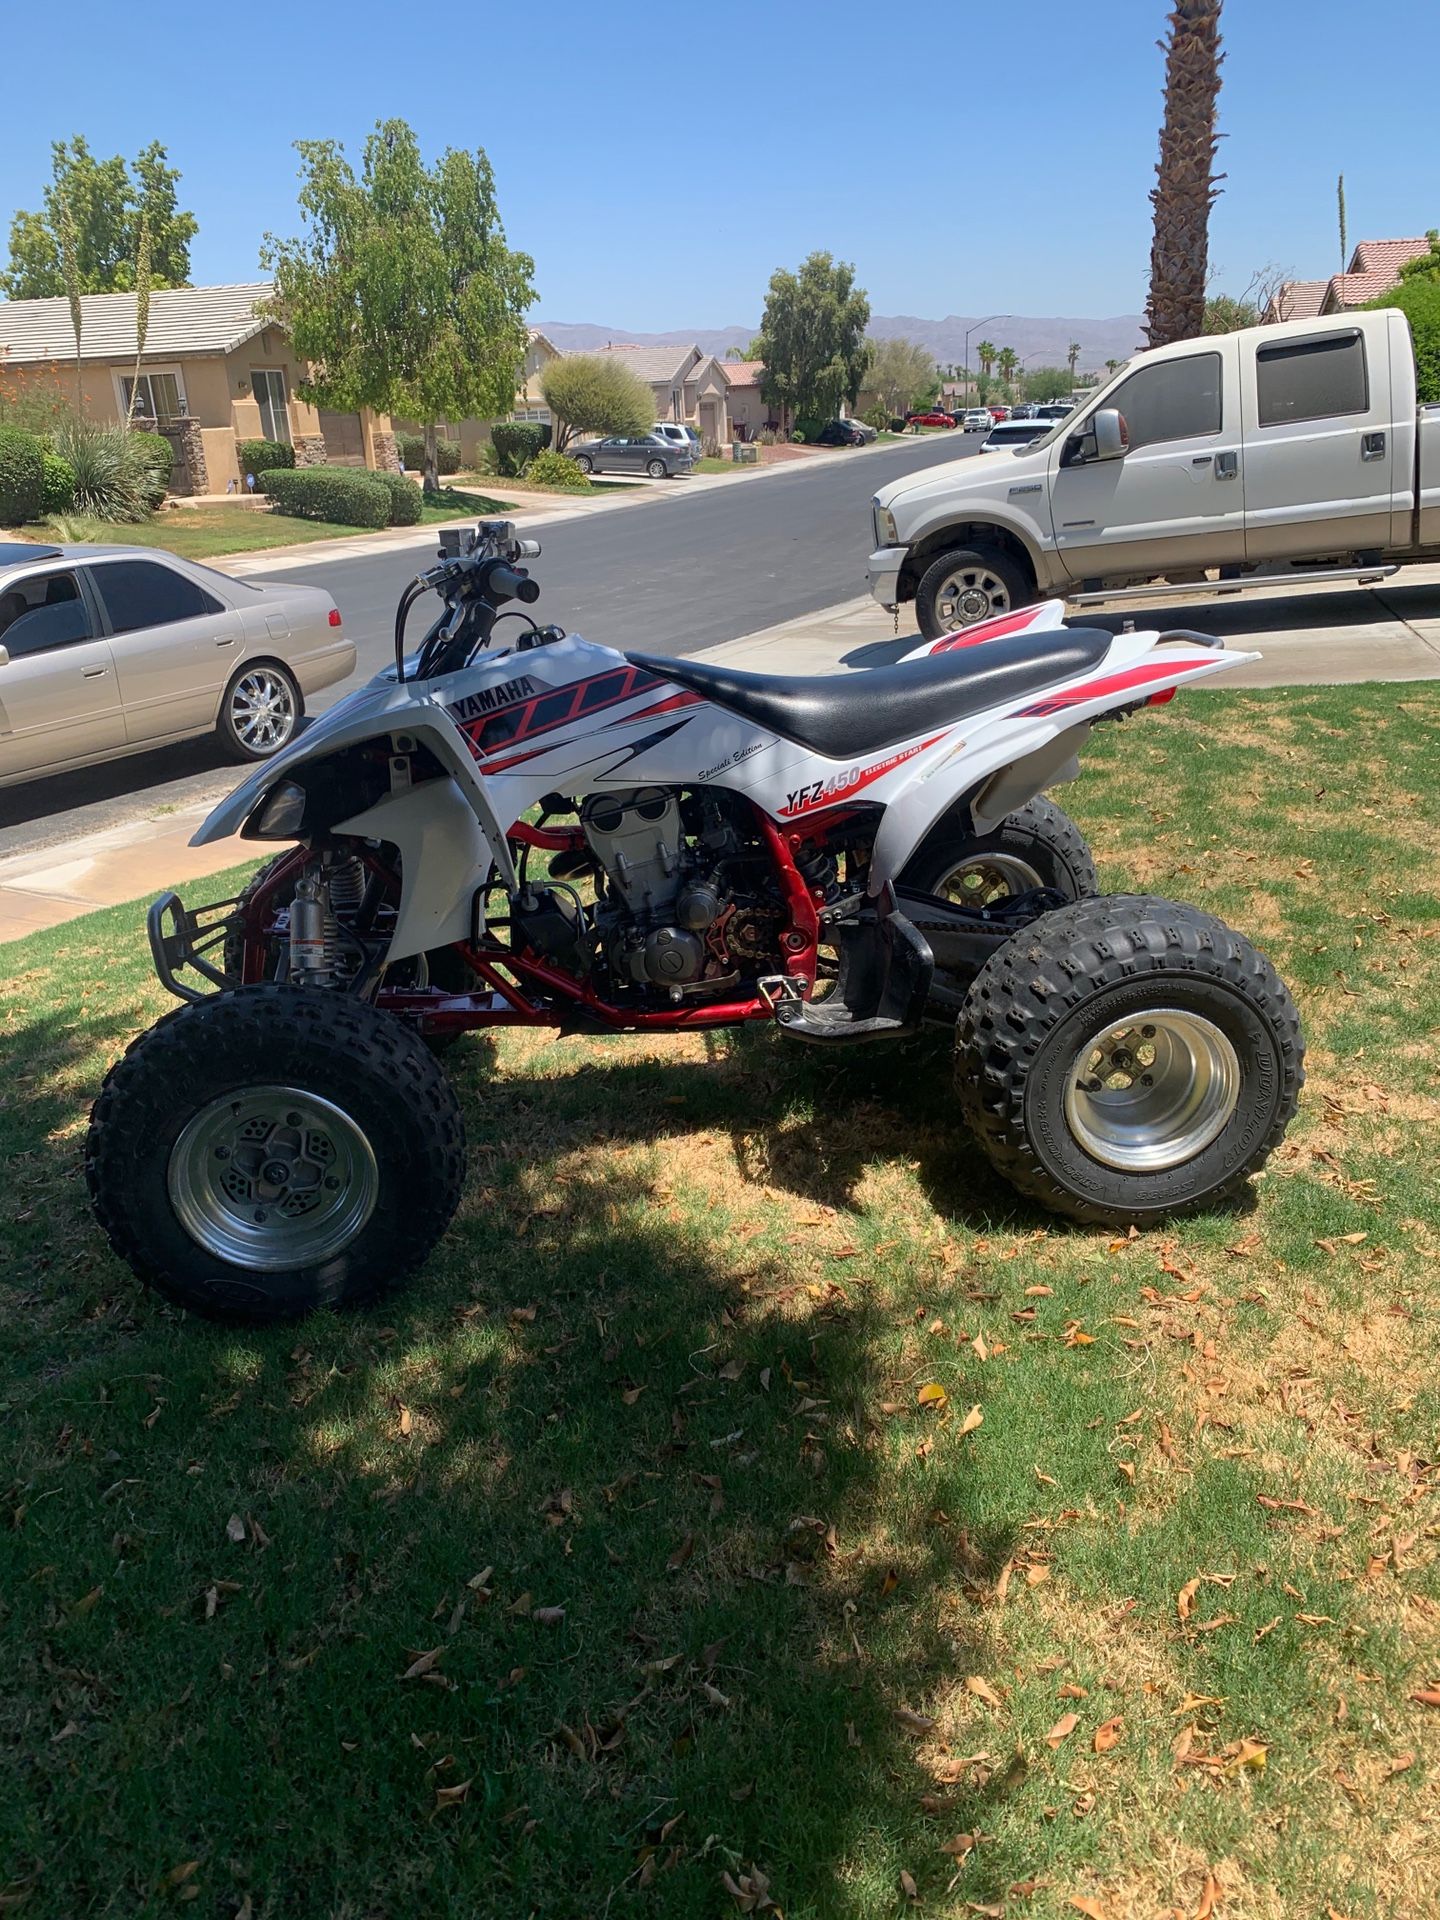 2005 Yamaha YFZ 450 Special Education. Tags up to date 2021, everything works perfect got some up grades very fast bike has k&n filter Dasa Raceing E